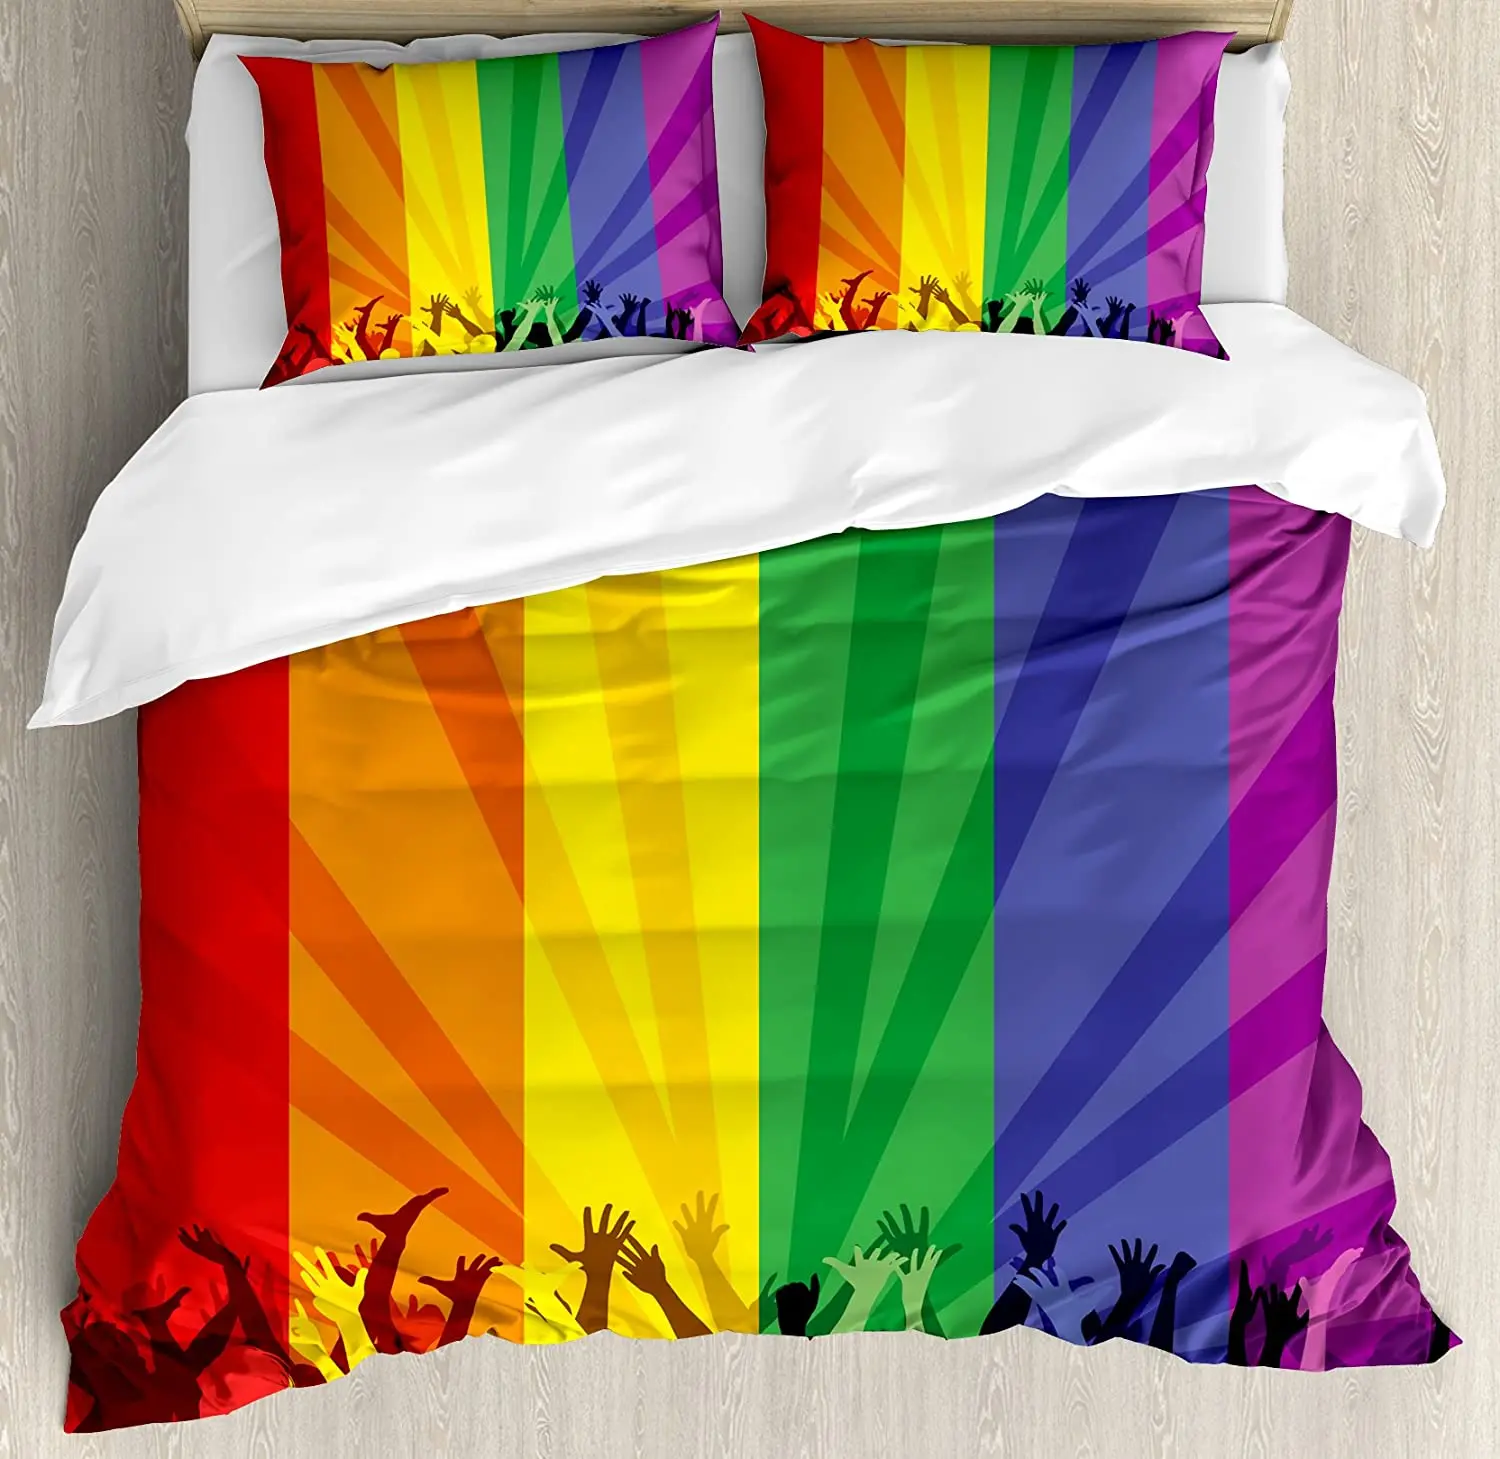 

Pride Decorations Bedding Set For Bedroom Bed Home People Celebrating International Day f Duvet Cover Quilt Cover And Pillowcase